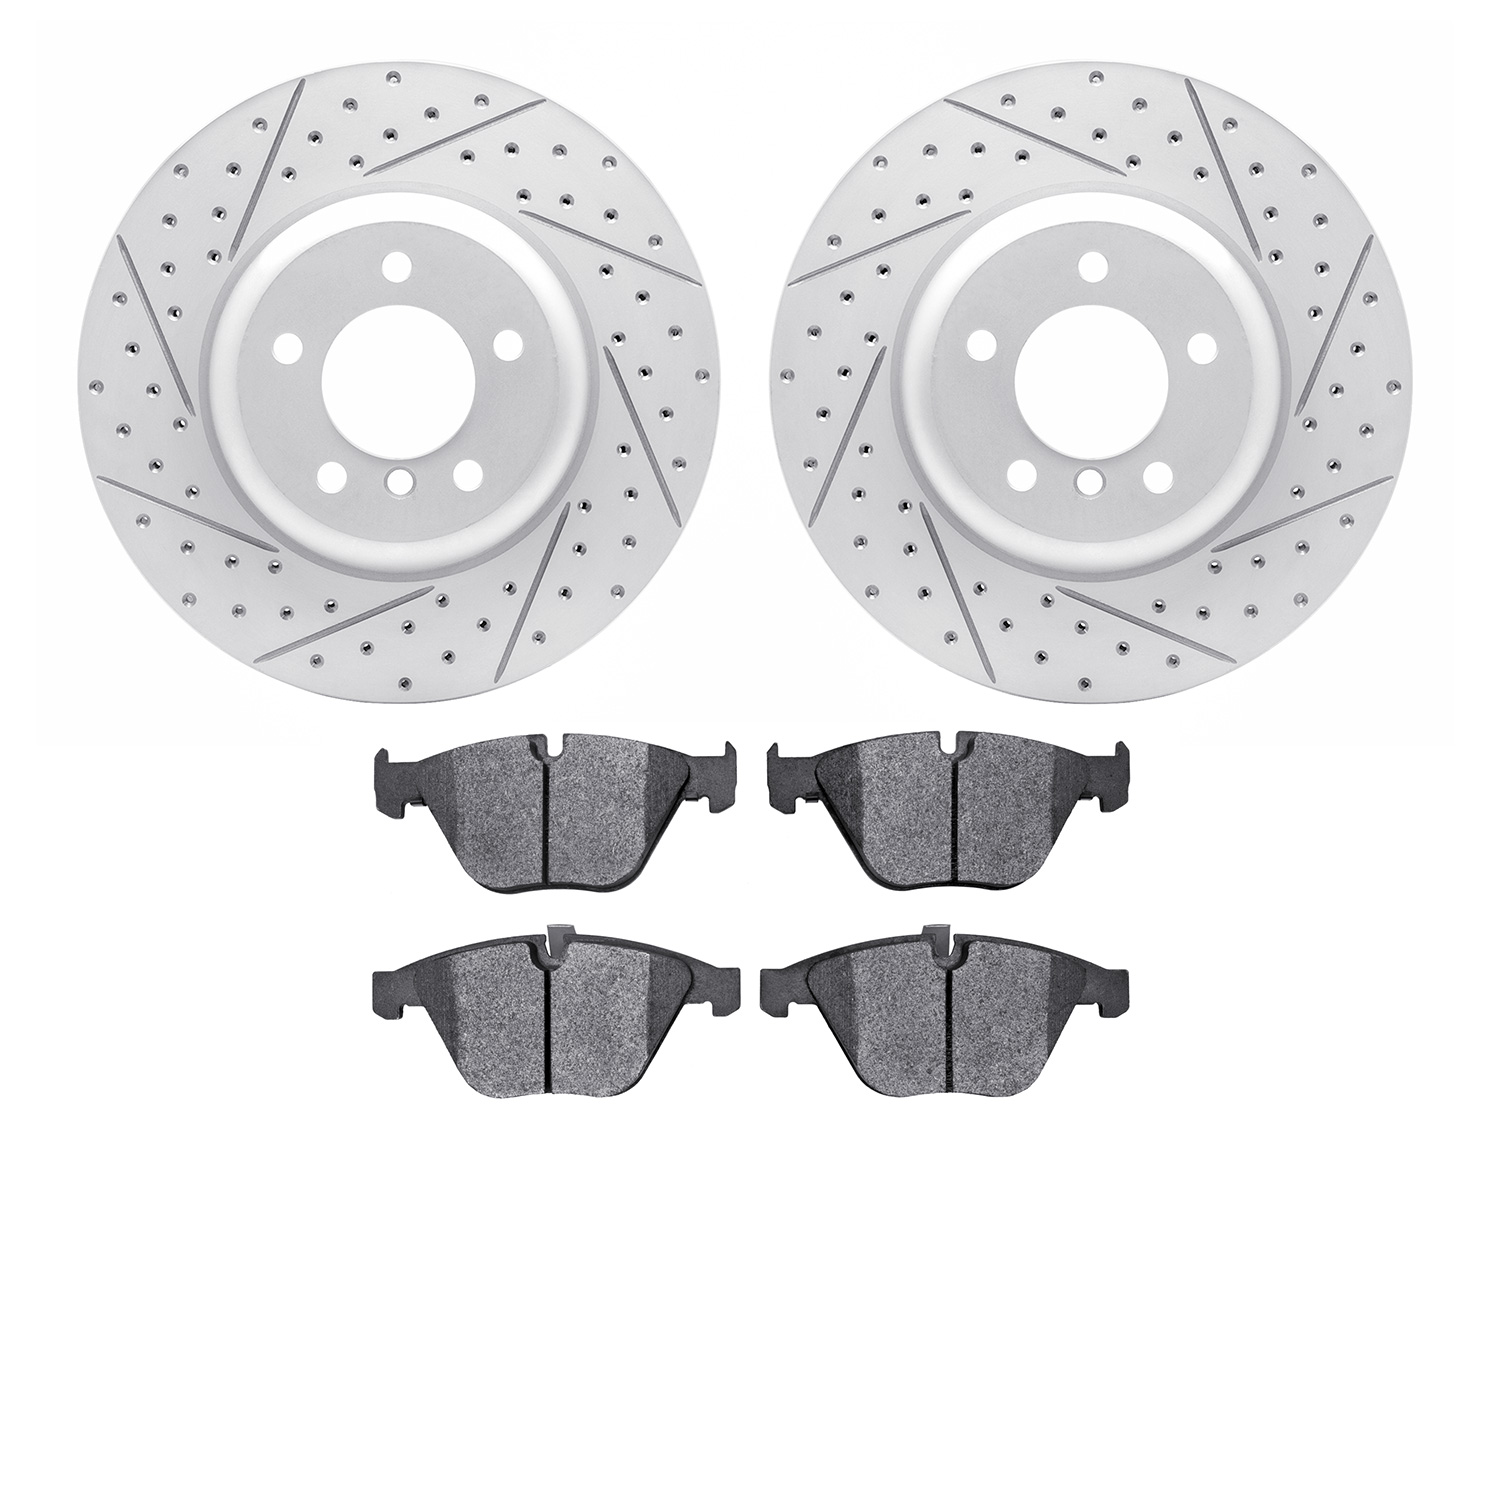 2502-31046 Geoperformance Drilled/Slotted Rotors w/5000 Advanced Brake Pads Kit, 2004-2010 BMW, Position: Front